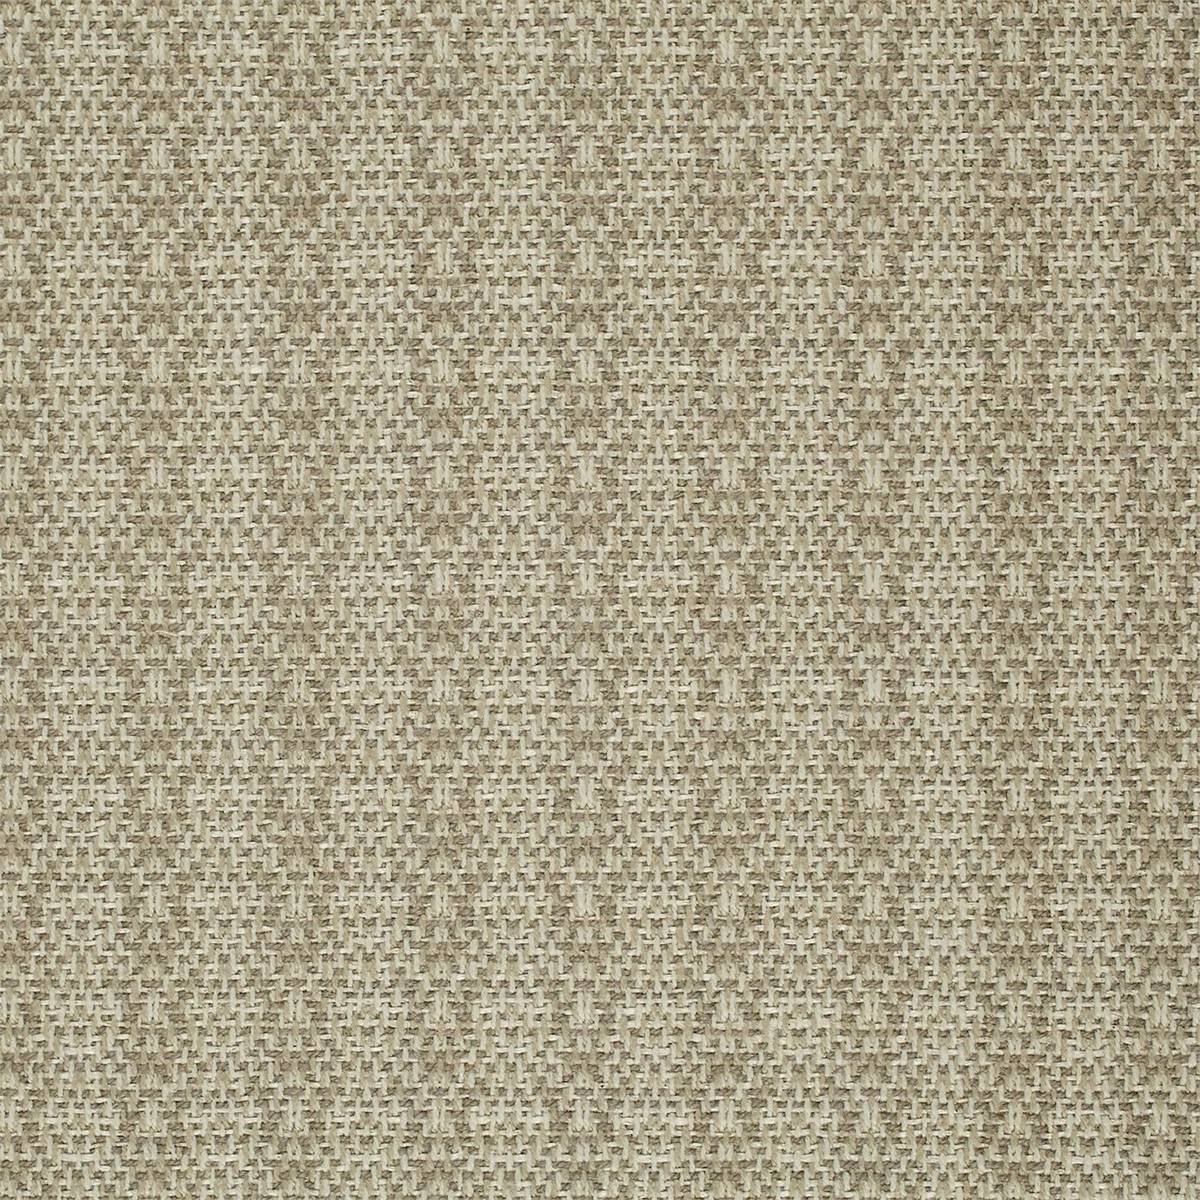 Cottesmore Linen Fabric by Zoffany